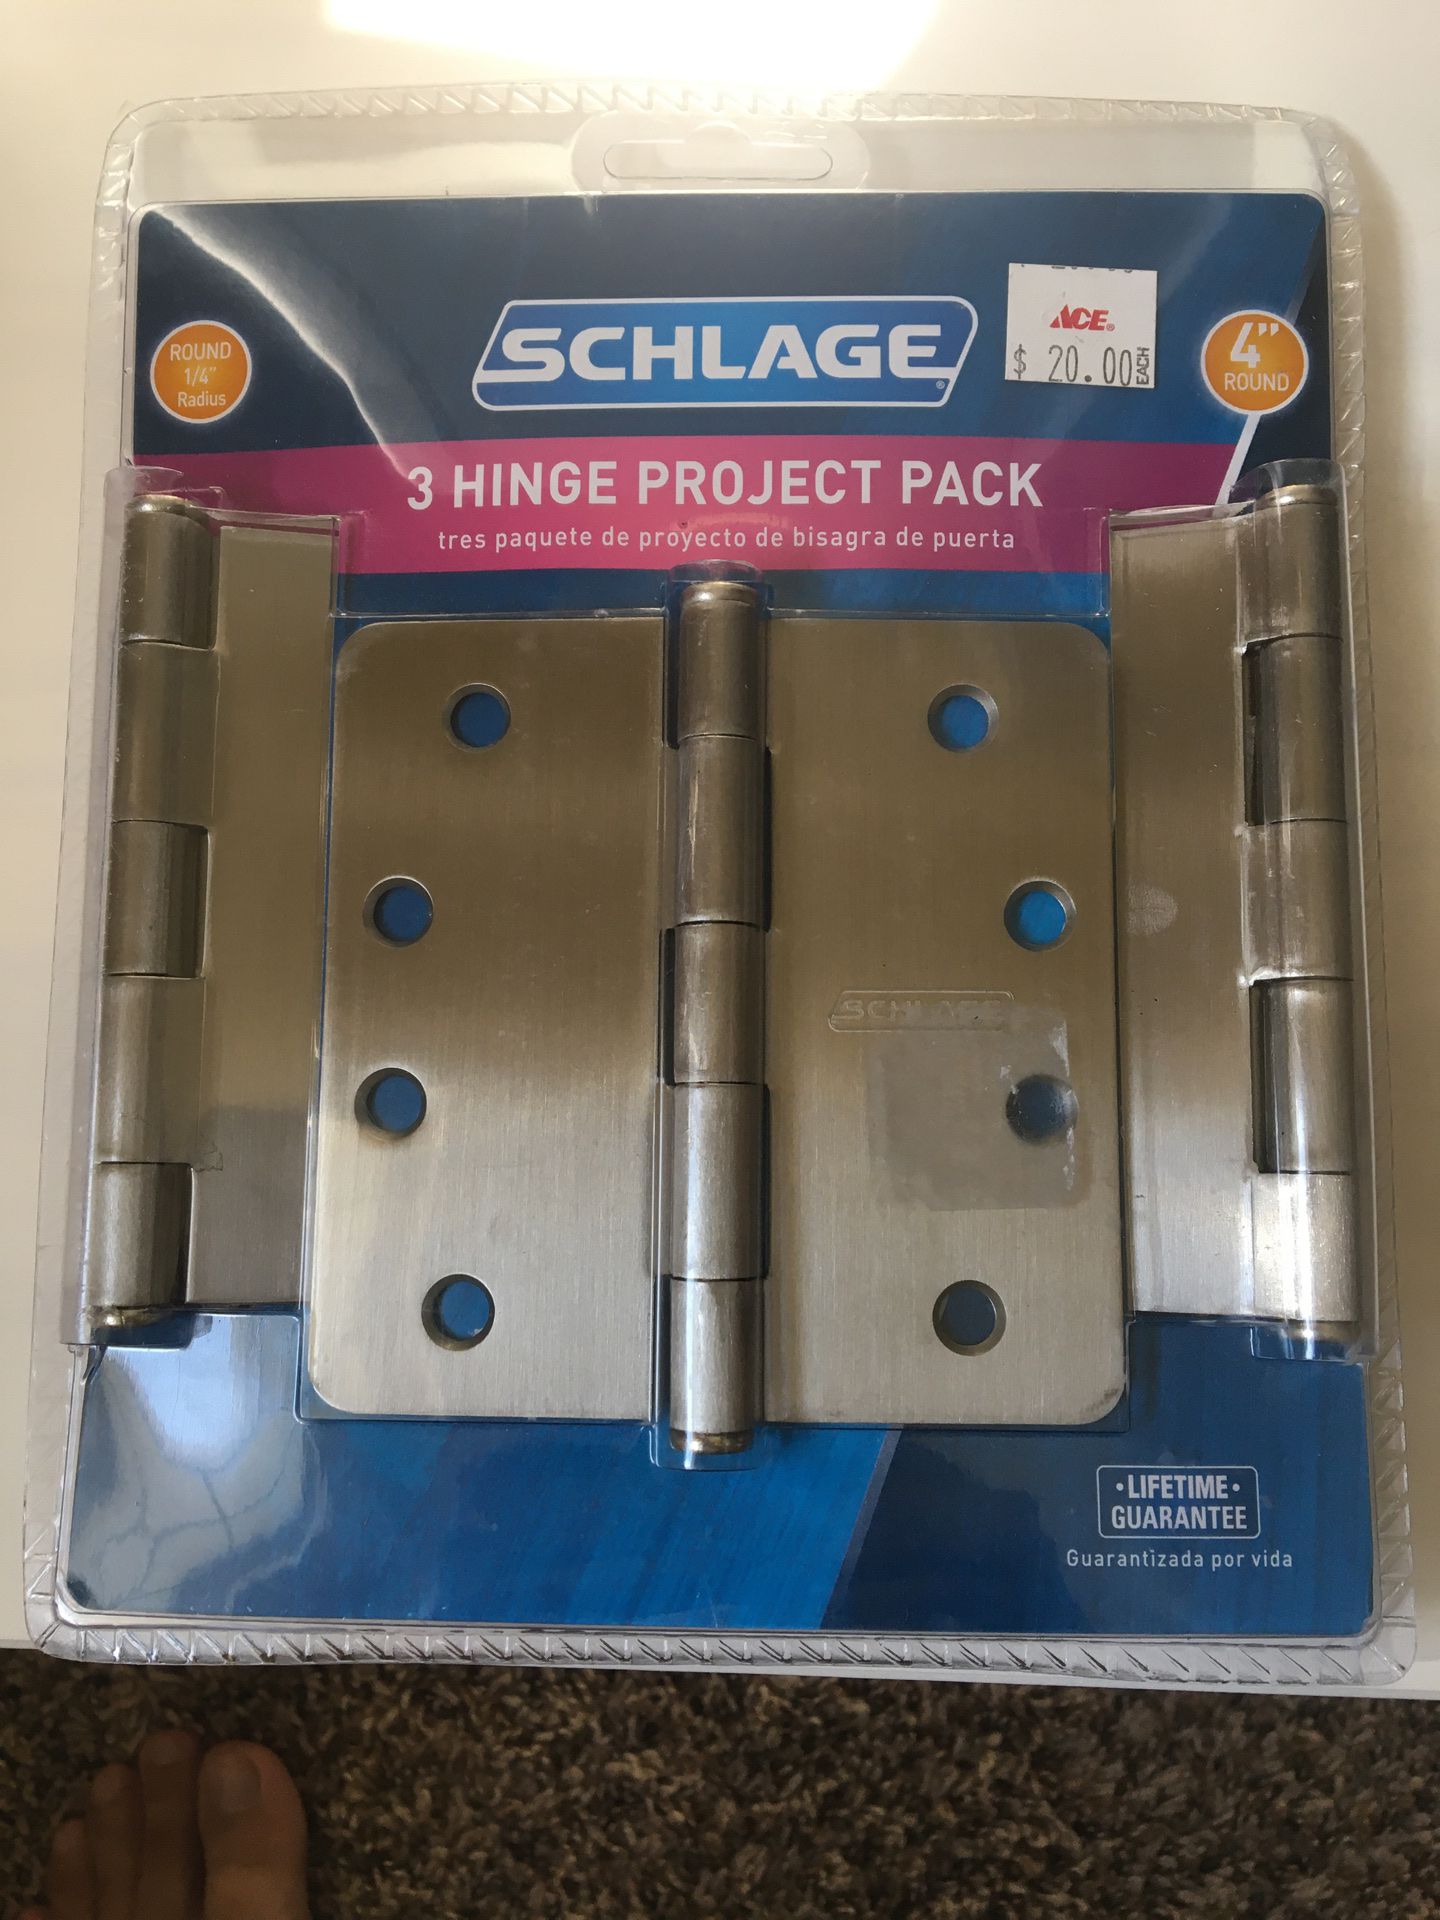 Schlage 3 hinge project pack